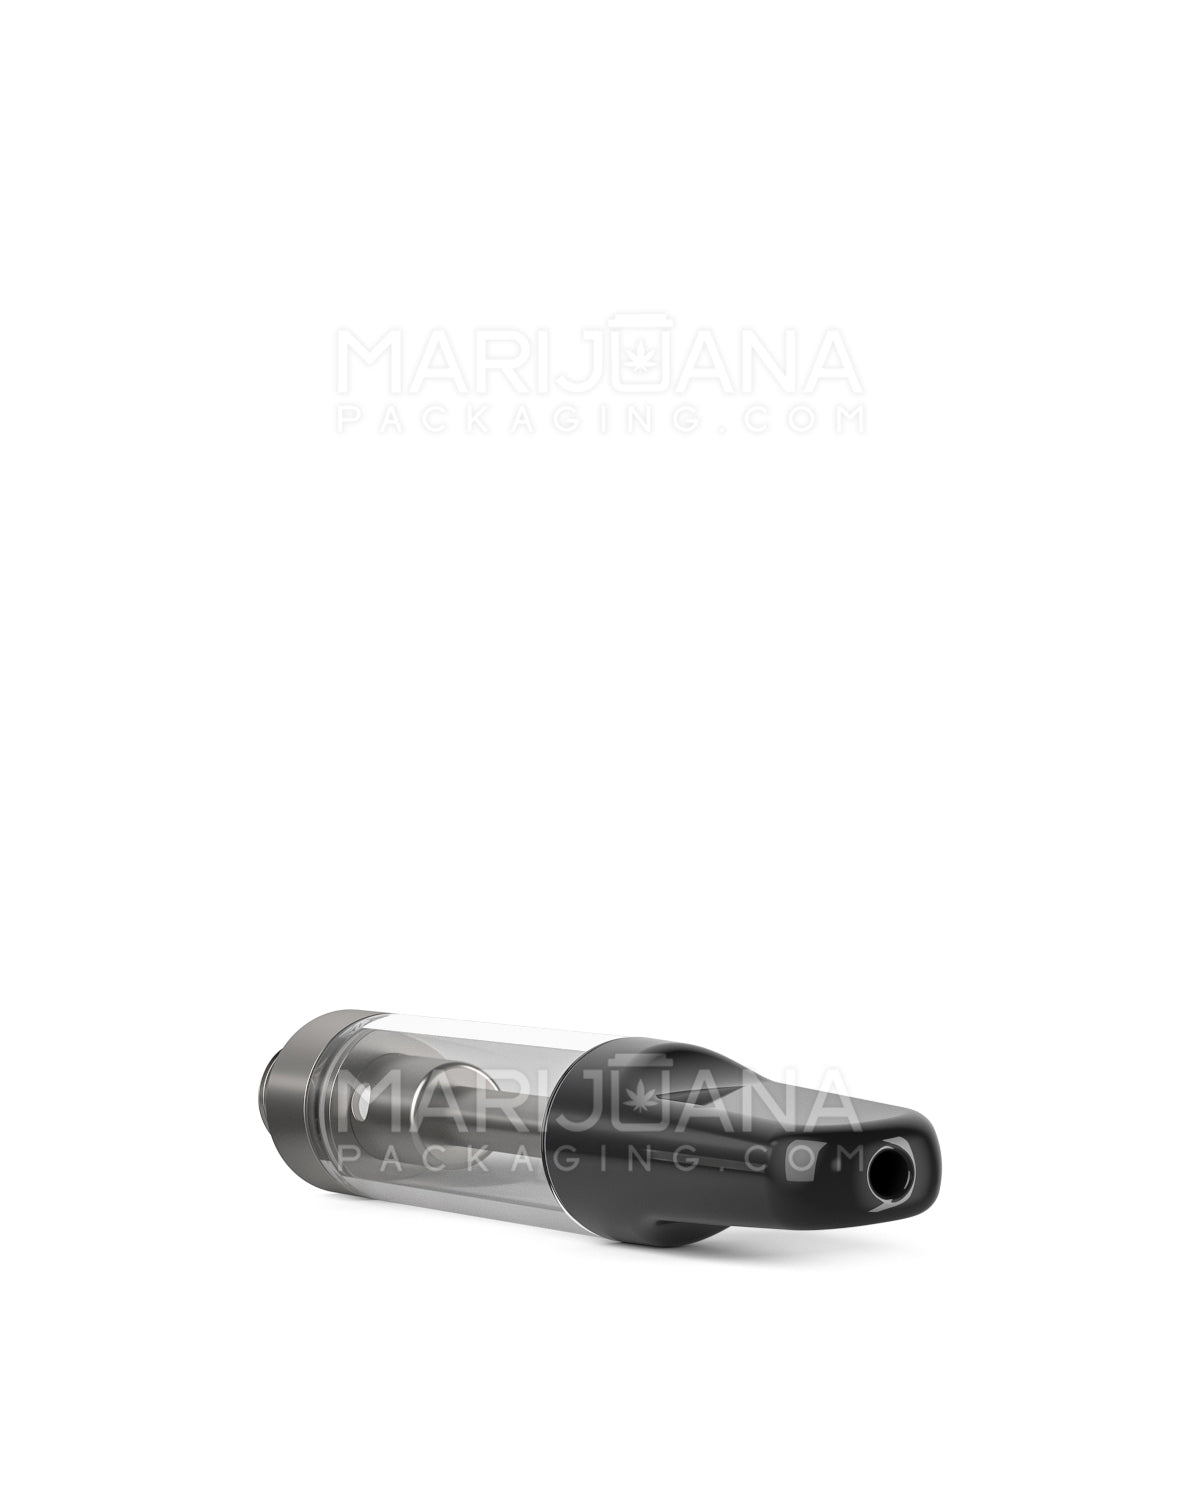 CCELL | Liquid6 Reactor Glass Vape Cartridge with Black Ceramic Mouthpiece | 1mL - Screw On - 100 Count - 7